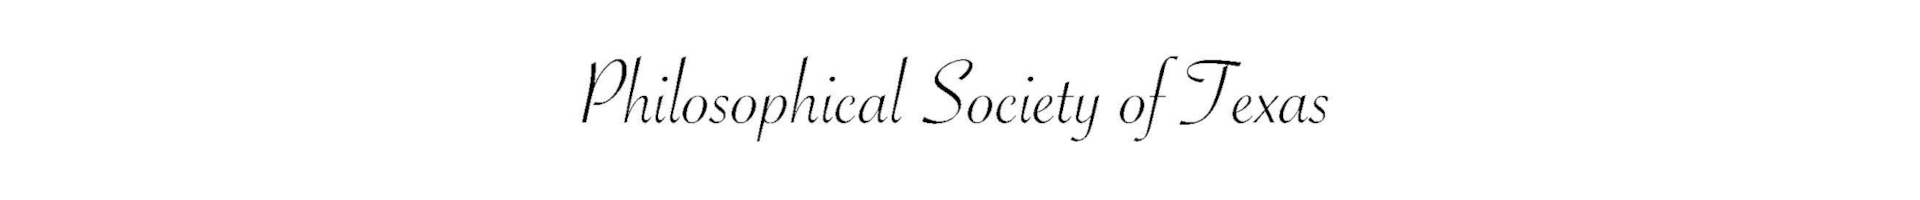 Philosophical Society of Texas